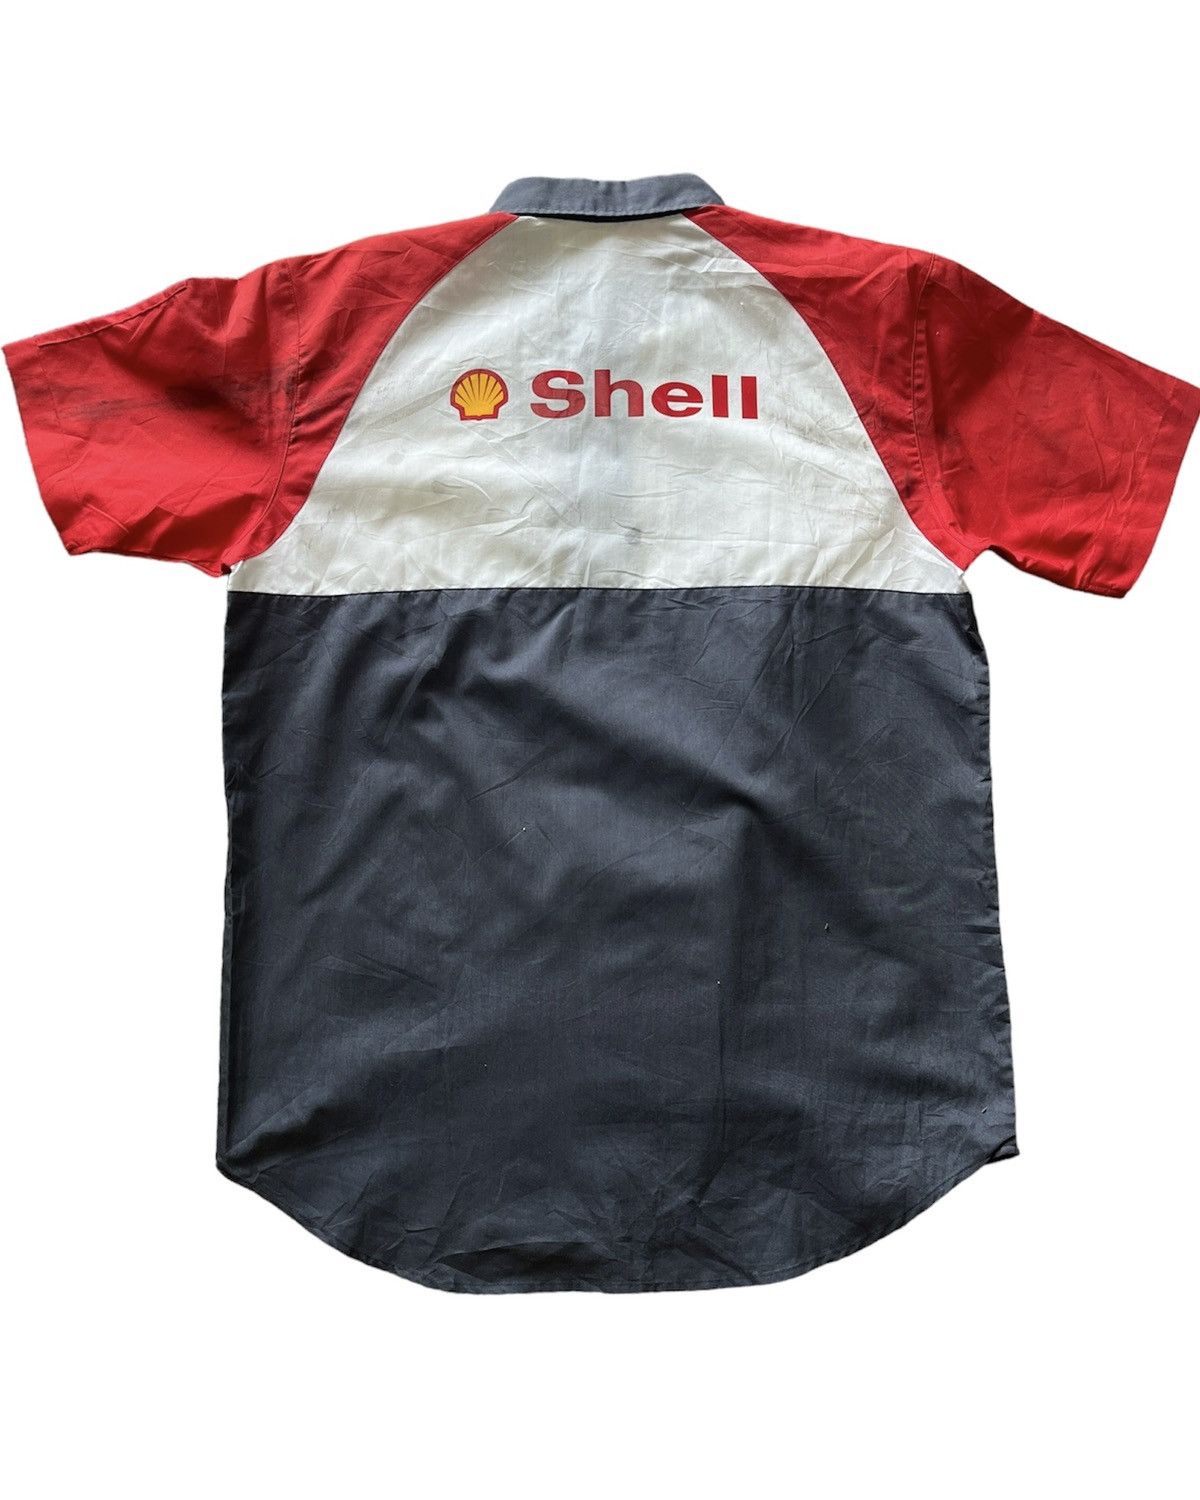 Vintage Shell Workers Uniform Shirts Japan - 2